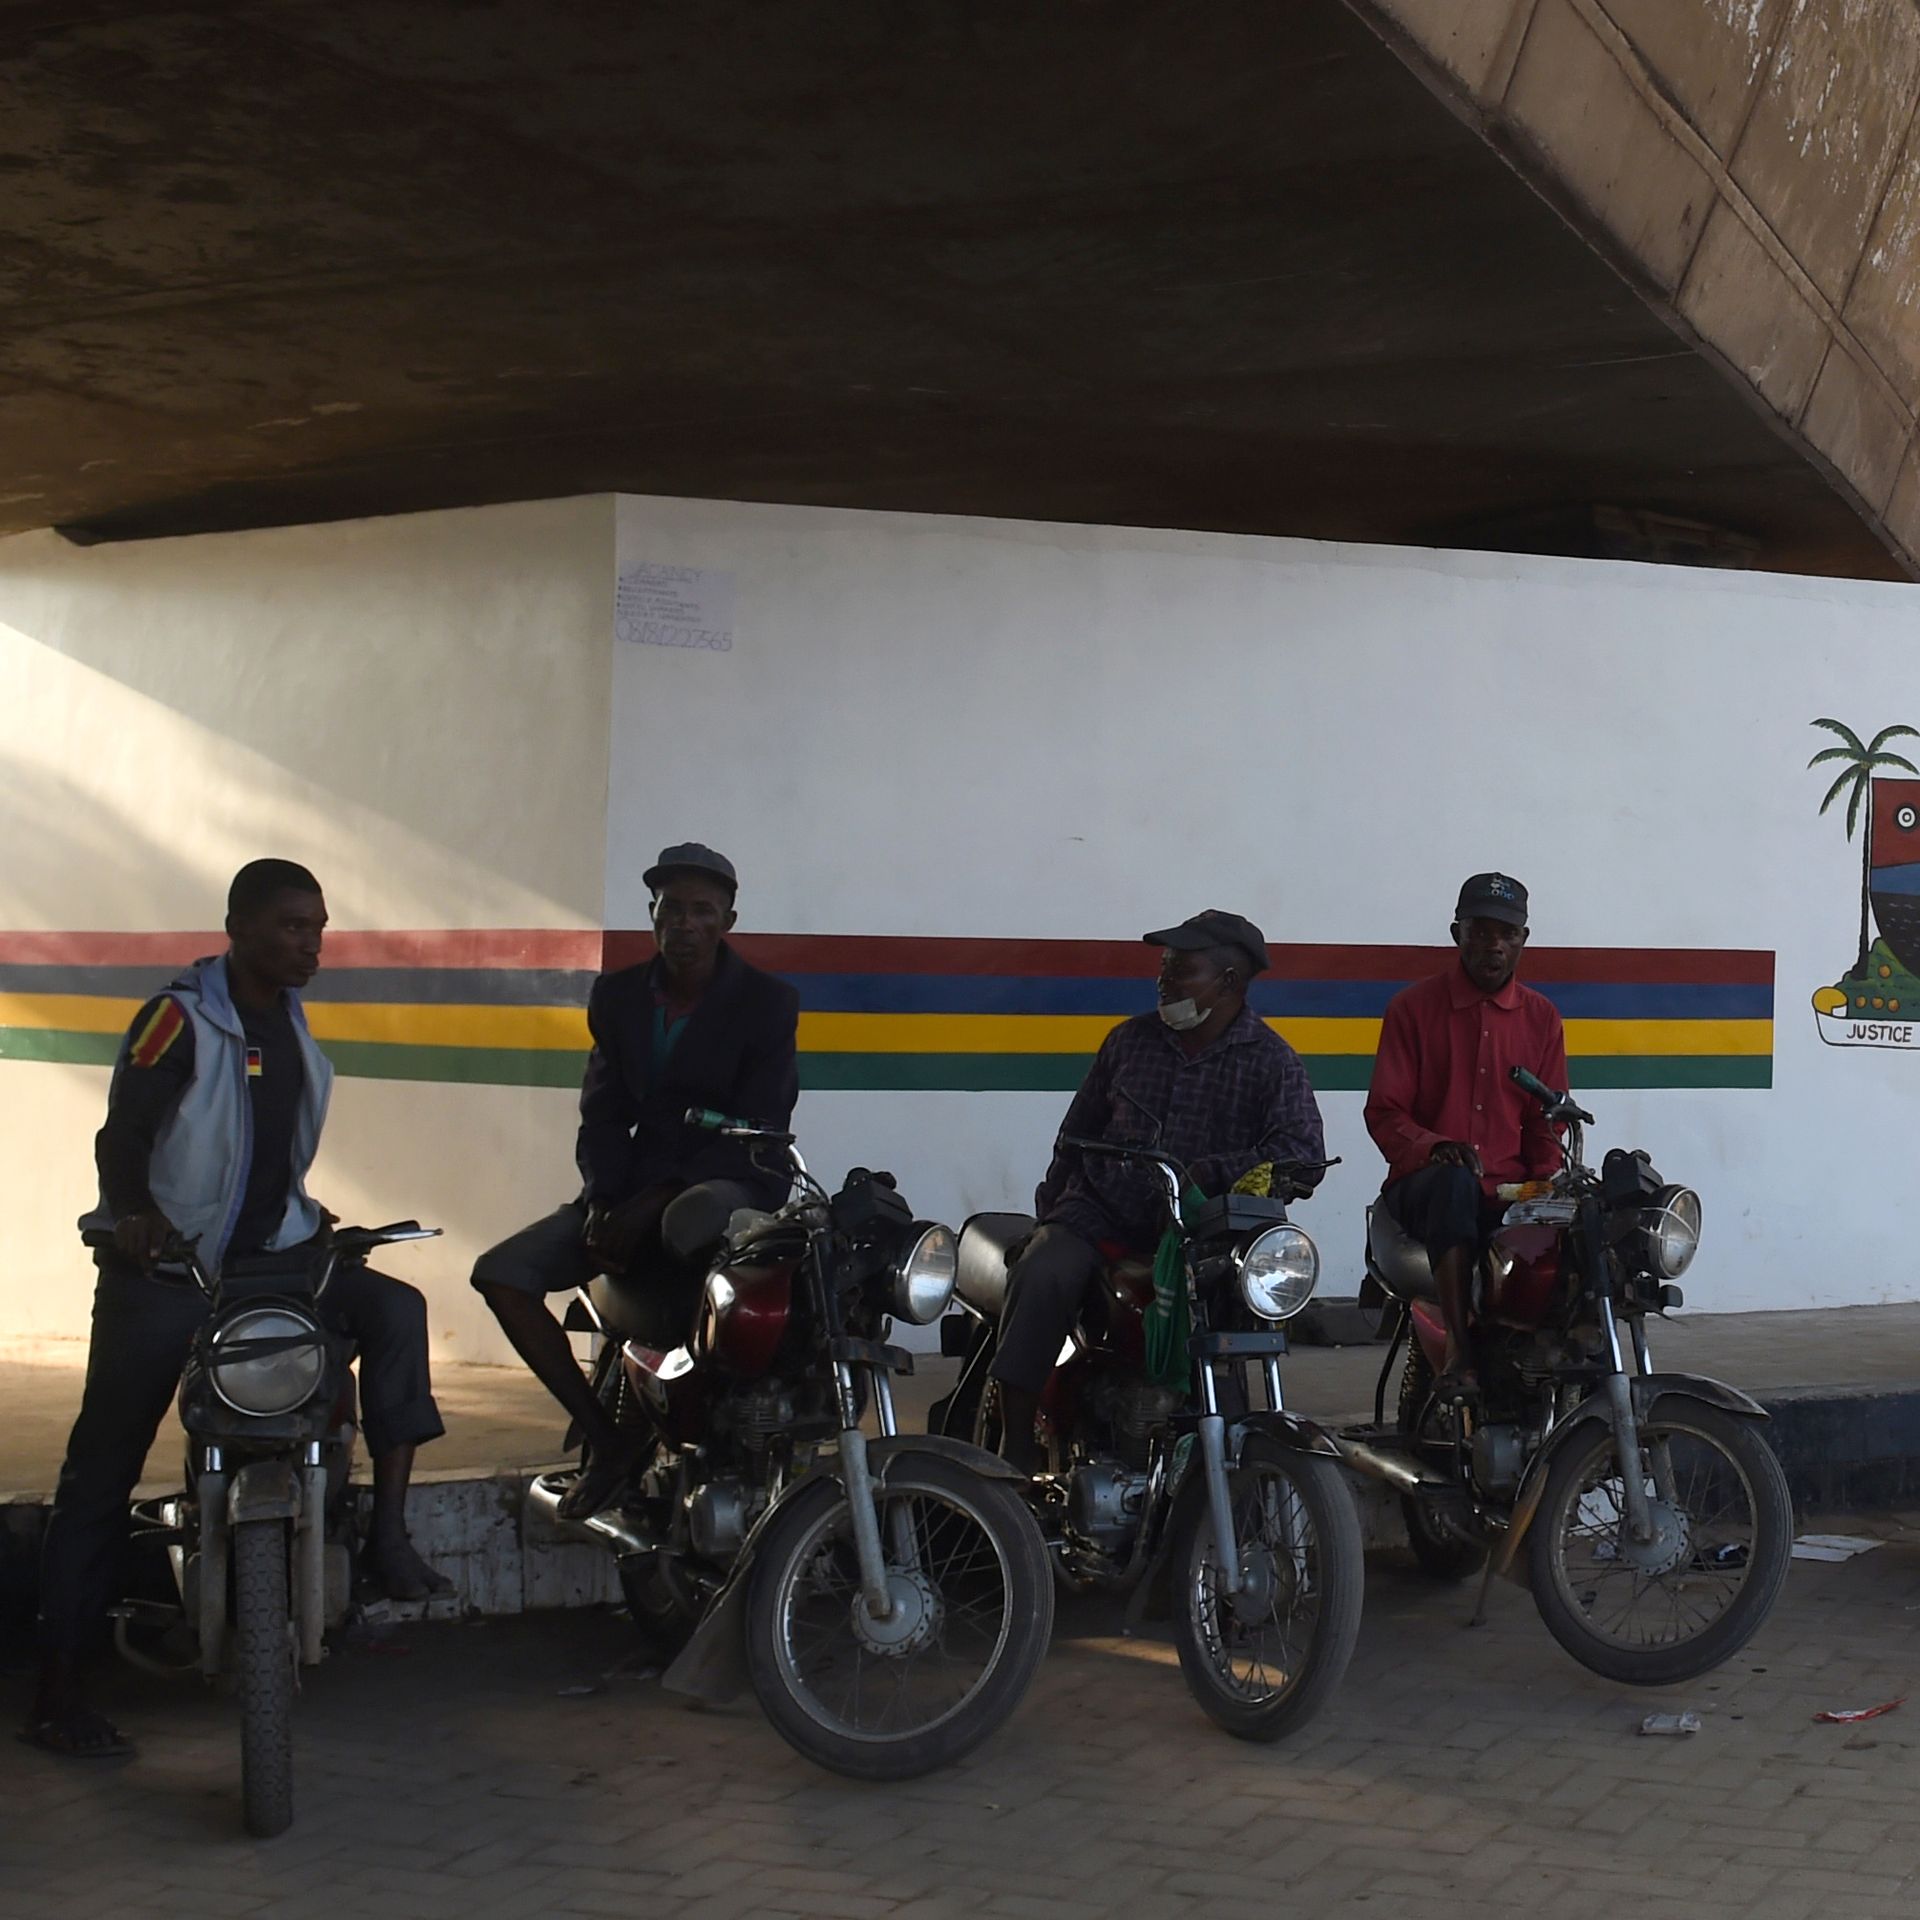 motorbike taxis waiting for passengers in the shade under an overpass